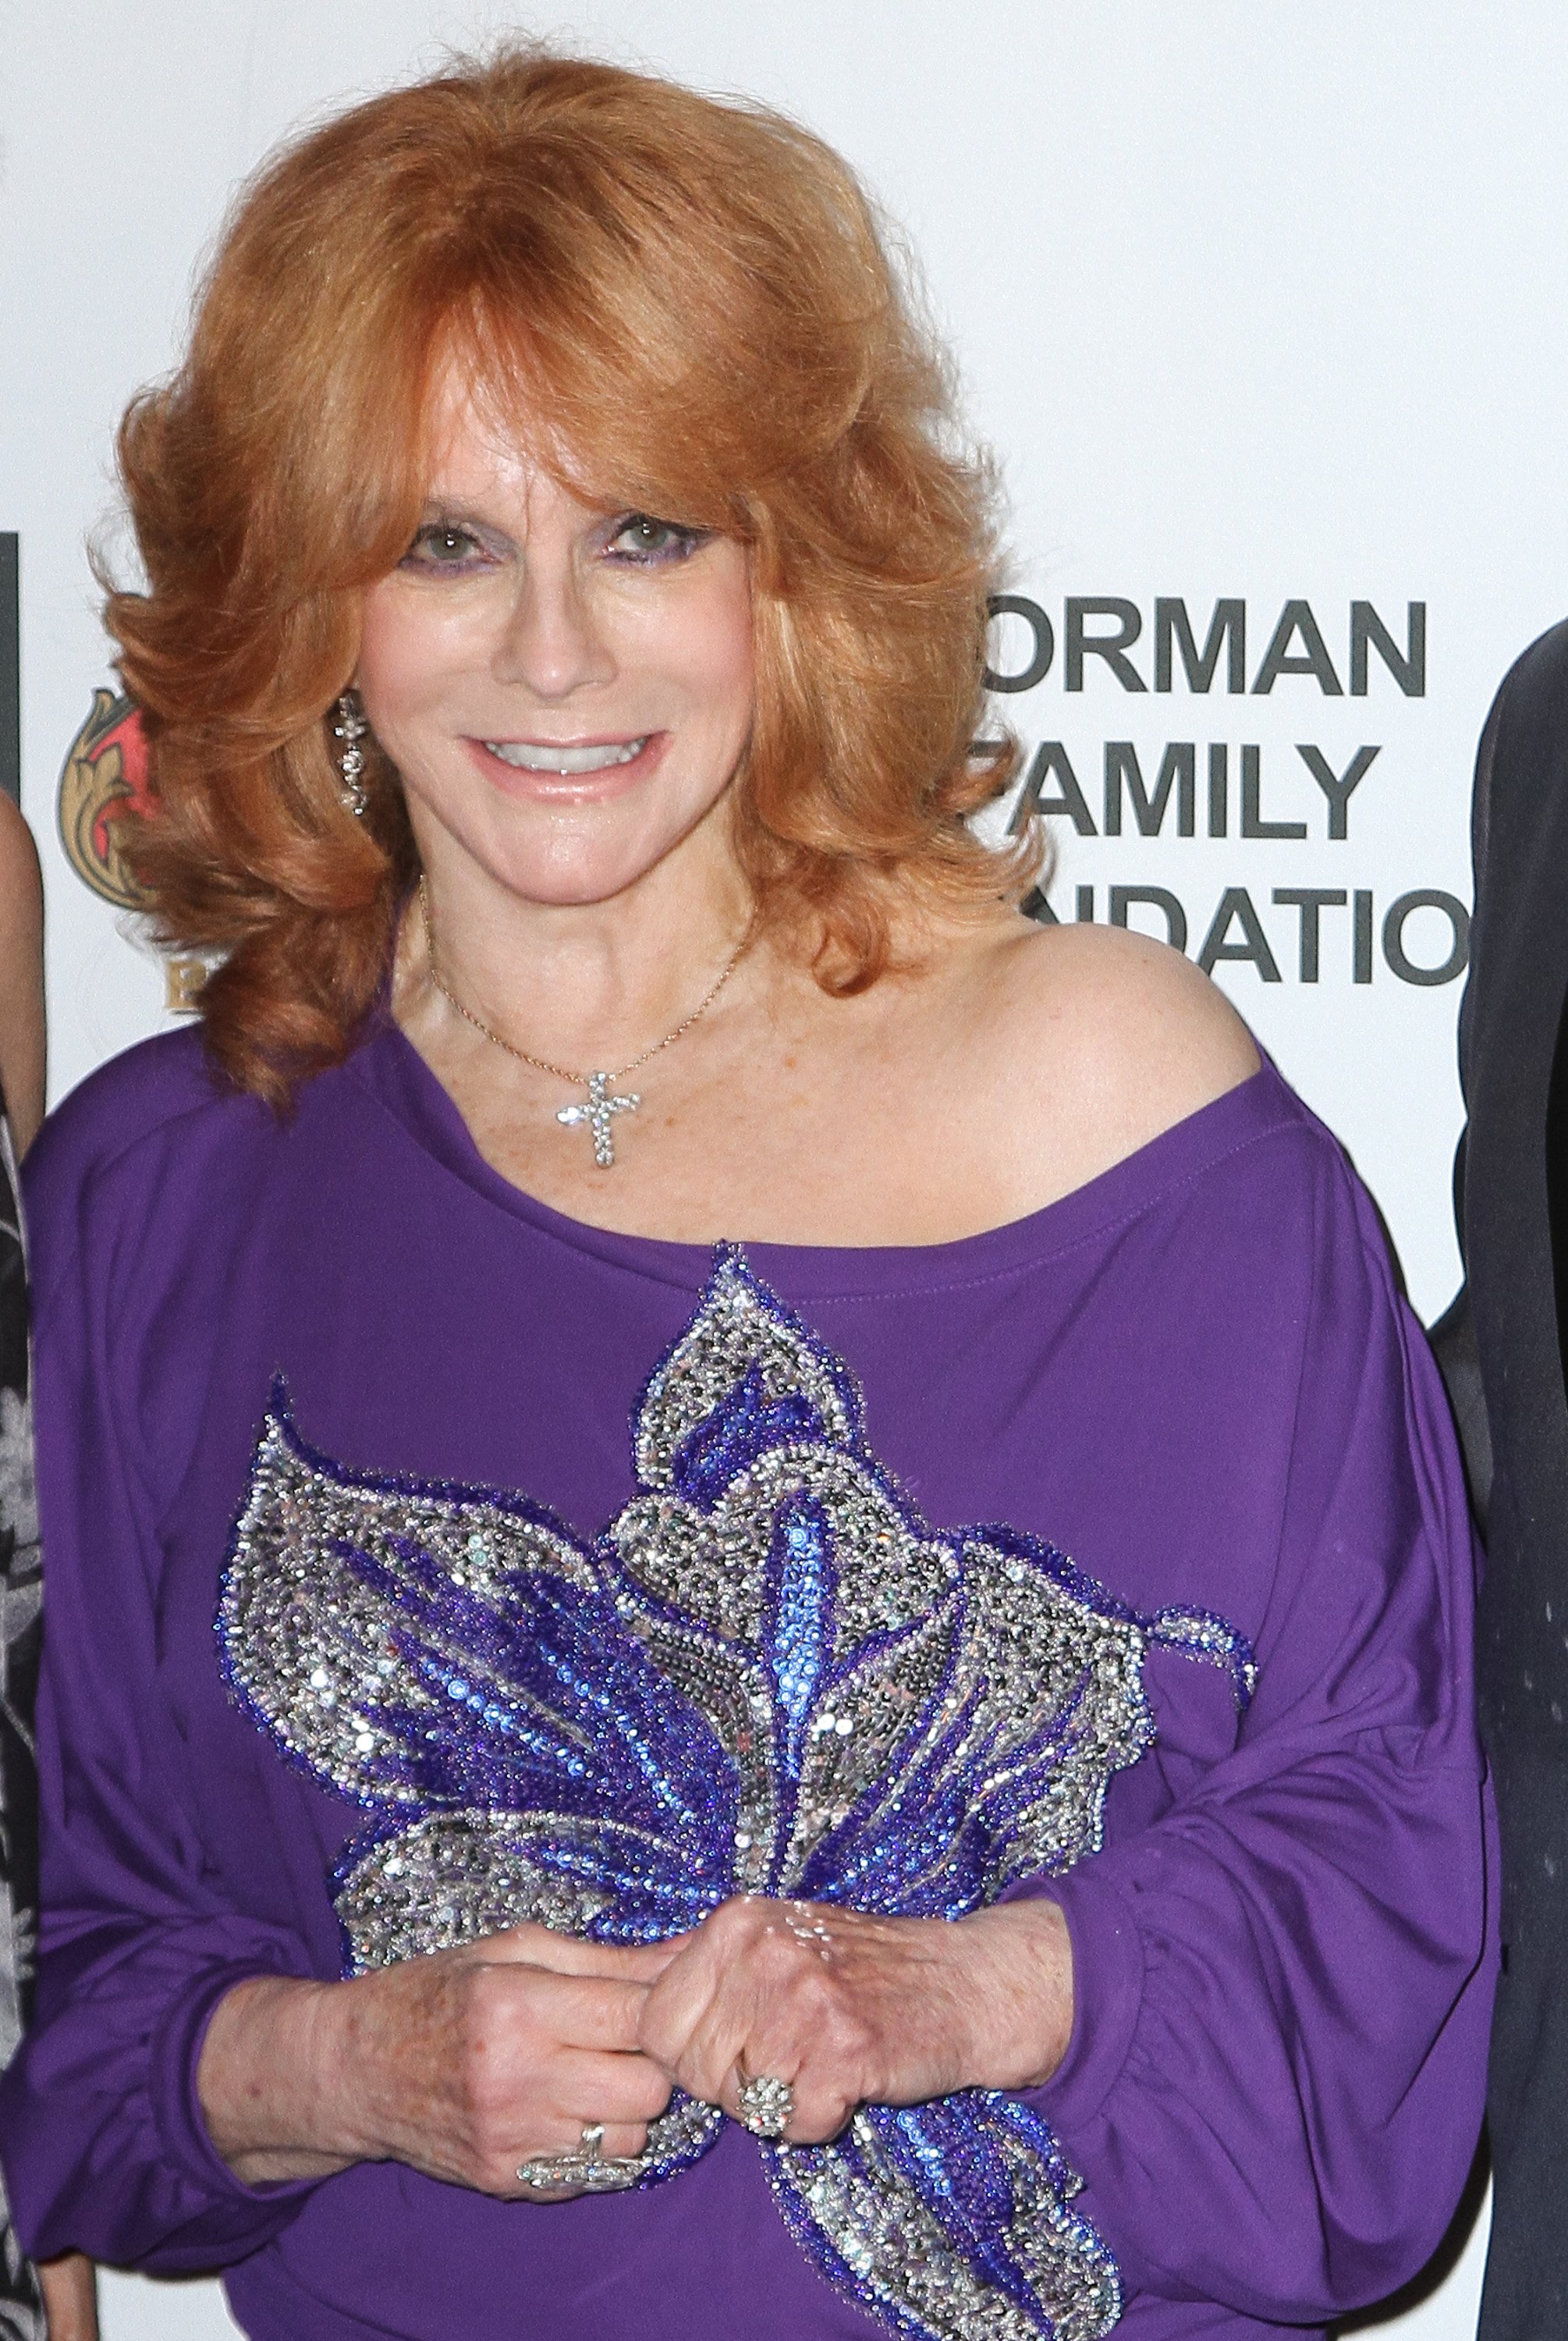 Ann-Margret attends The 28th Annual Fort Lauderdale International Film Festival Inaugural Chairmans Awards Gala at Westin Diplomat on November 9, 2013 in Hollywood, Florida. | Source: Getty Images